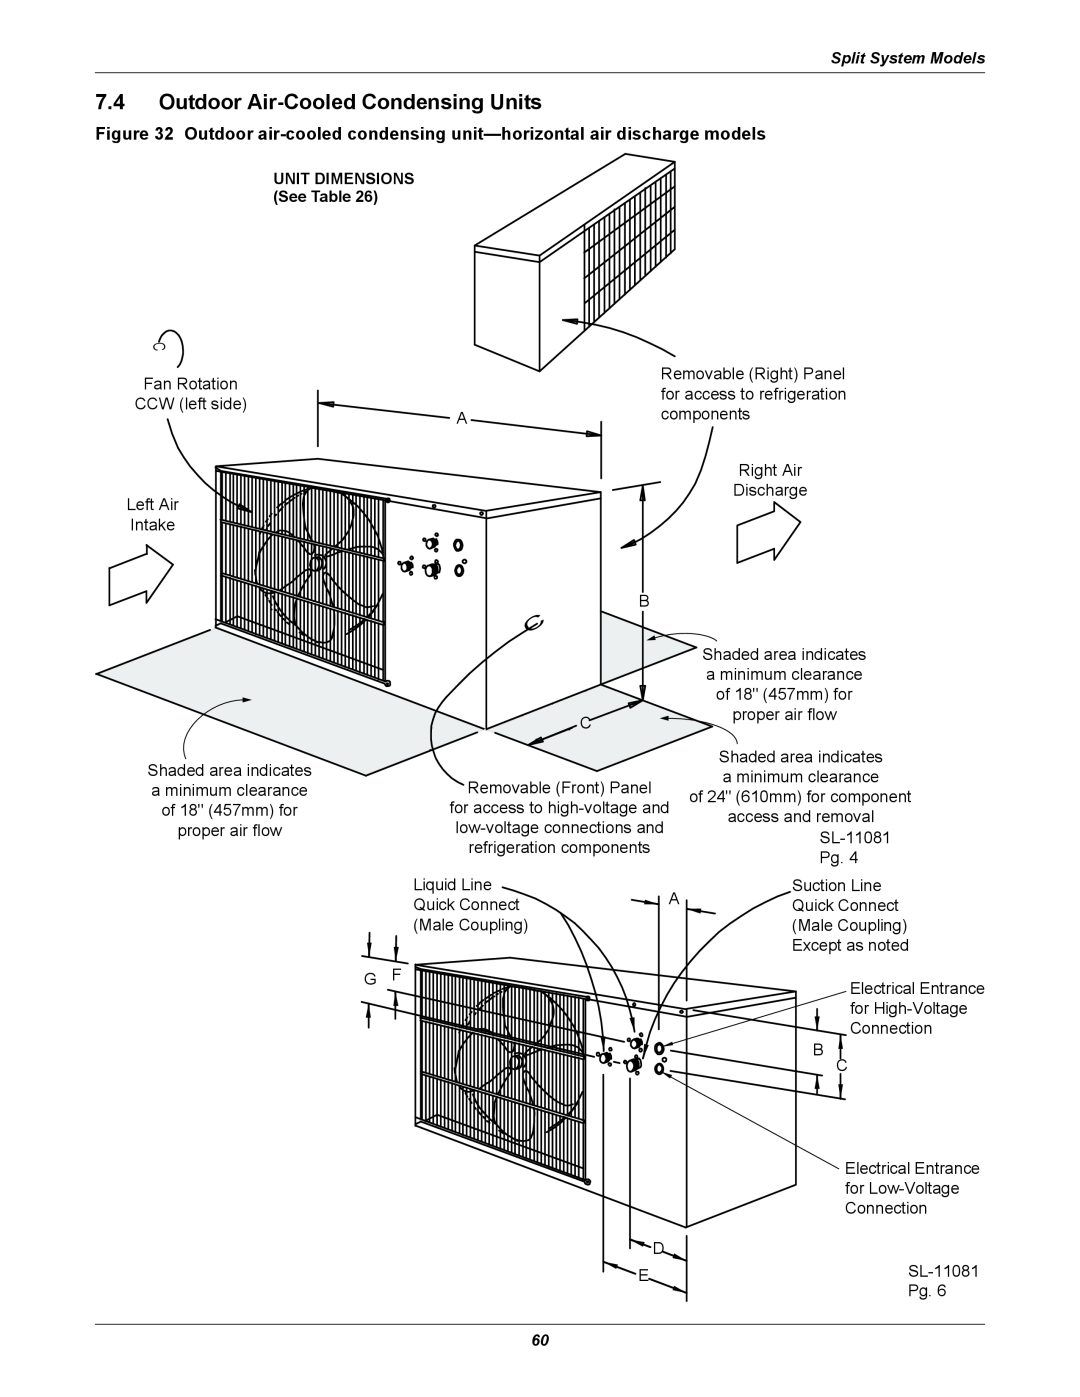 Emerson 3000 installation manual 7.4Outdoor Air-CooledCondensing Units 